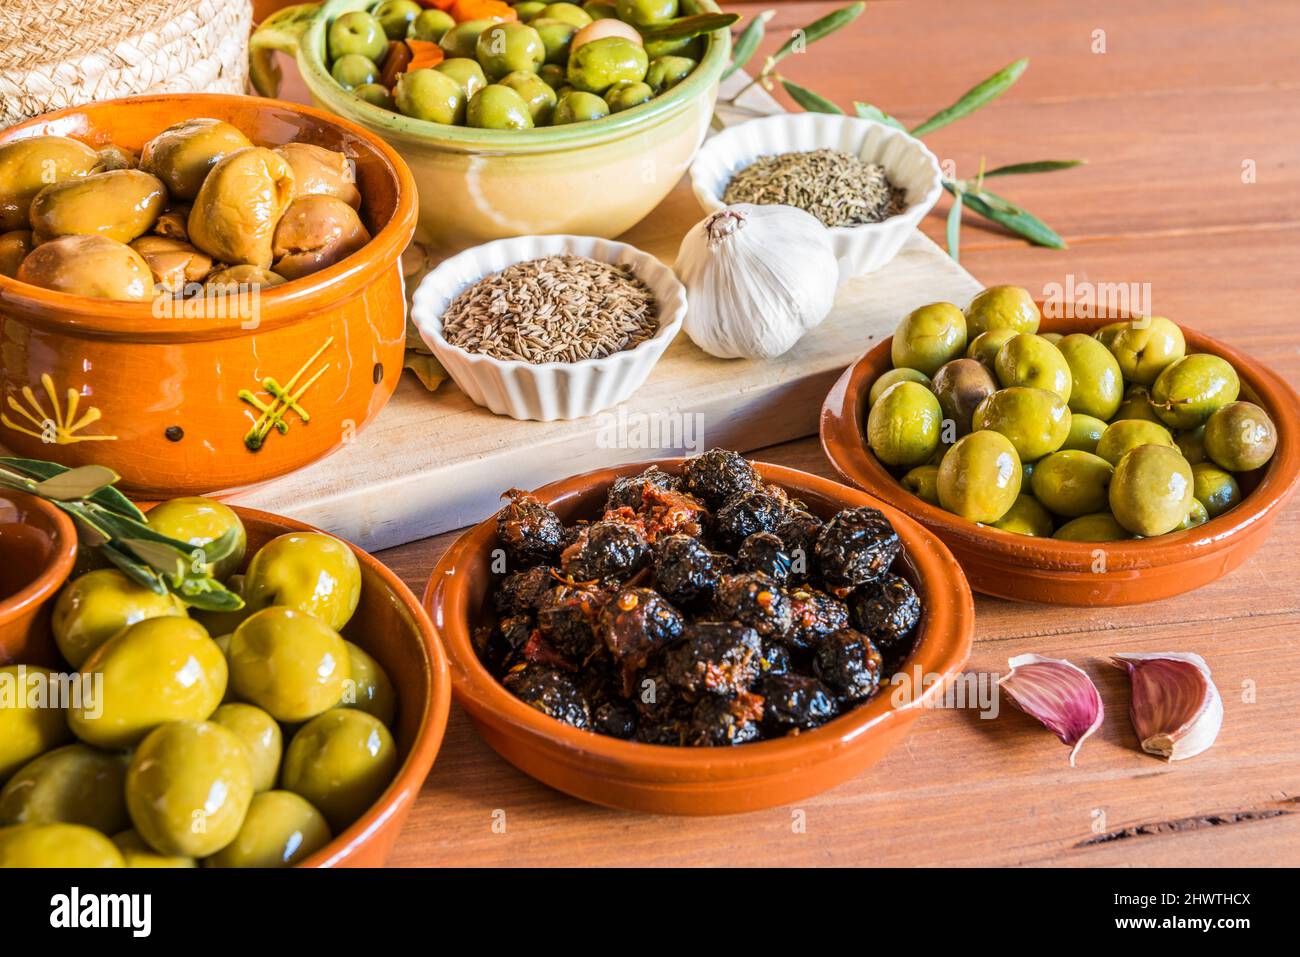 Still life with different varieties of olives, presented in bowls, dressed with different traditional dressings. Traditional homemade dressings, typic Stock Photo